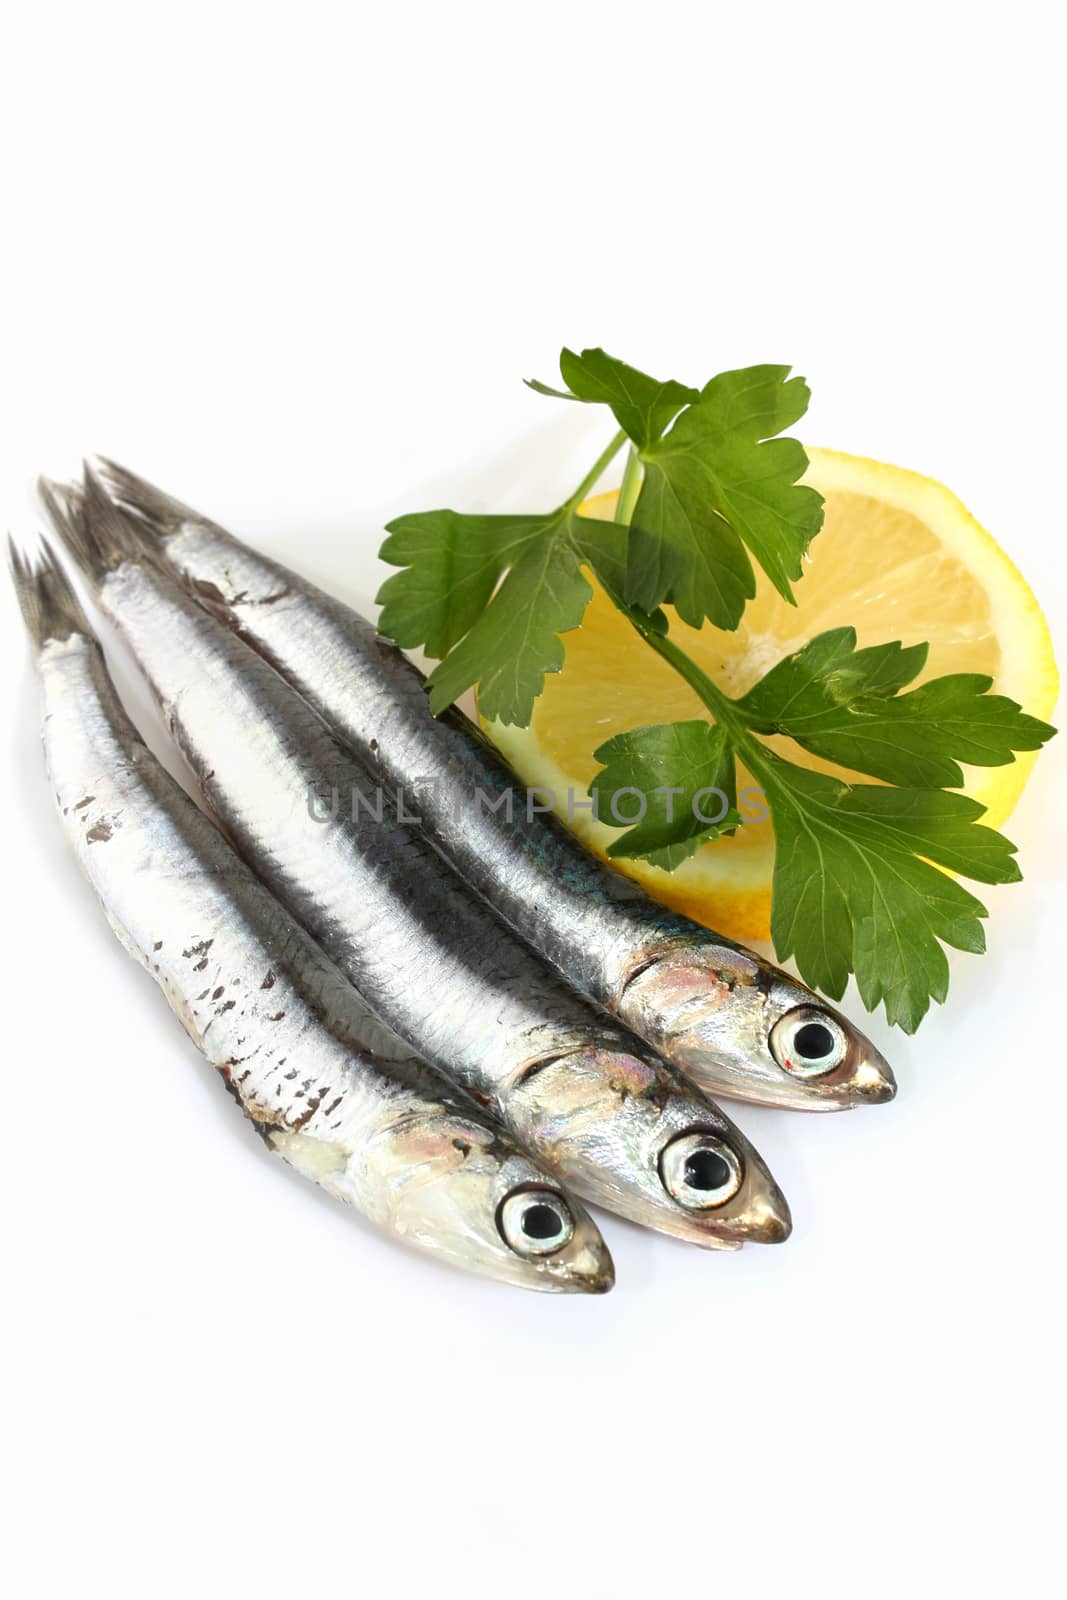 Anchovies with parsley and lemon on white background